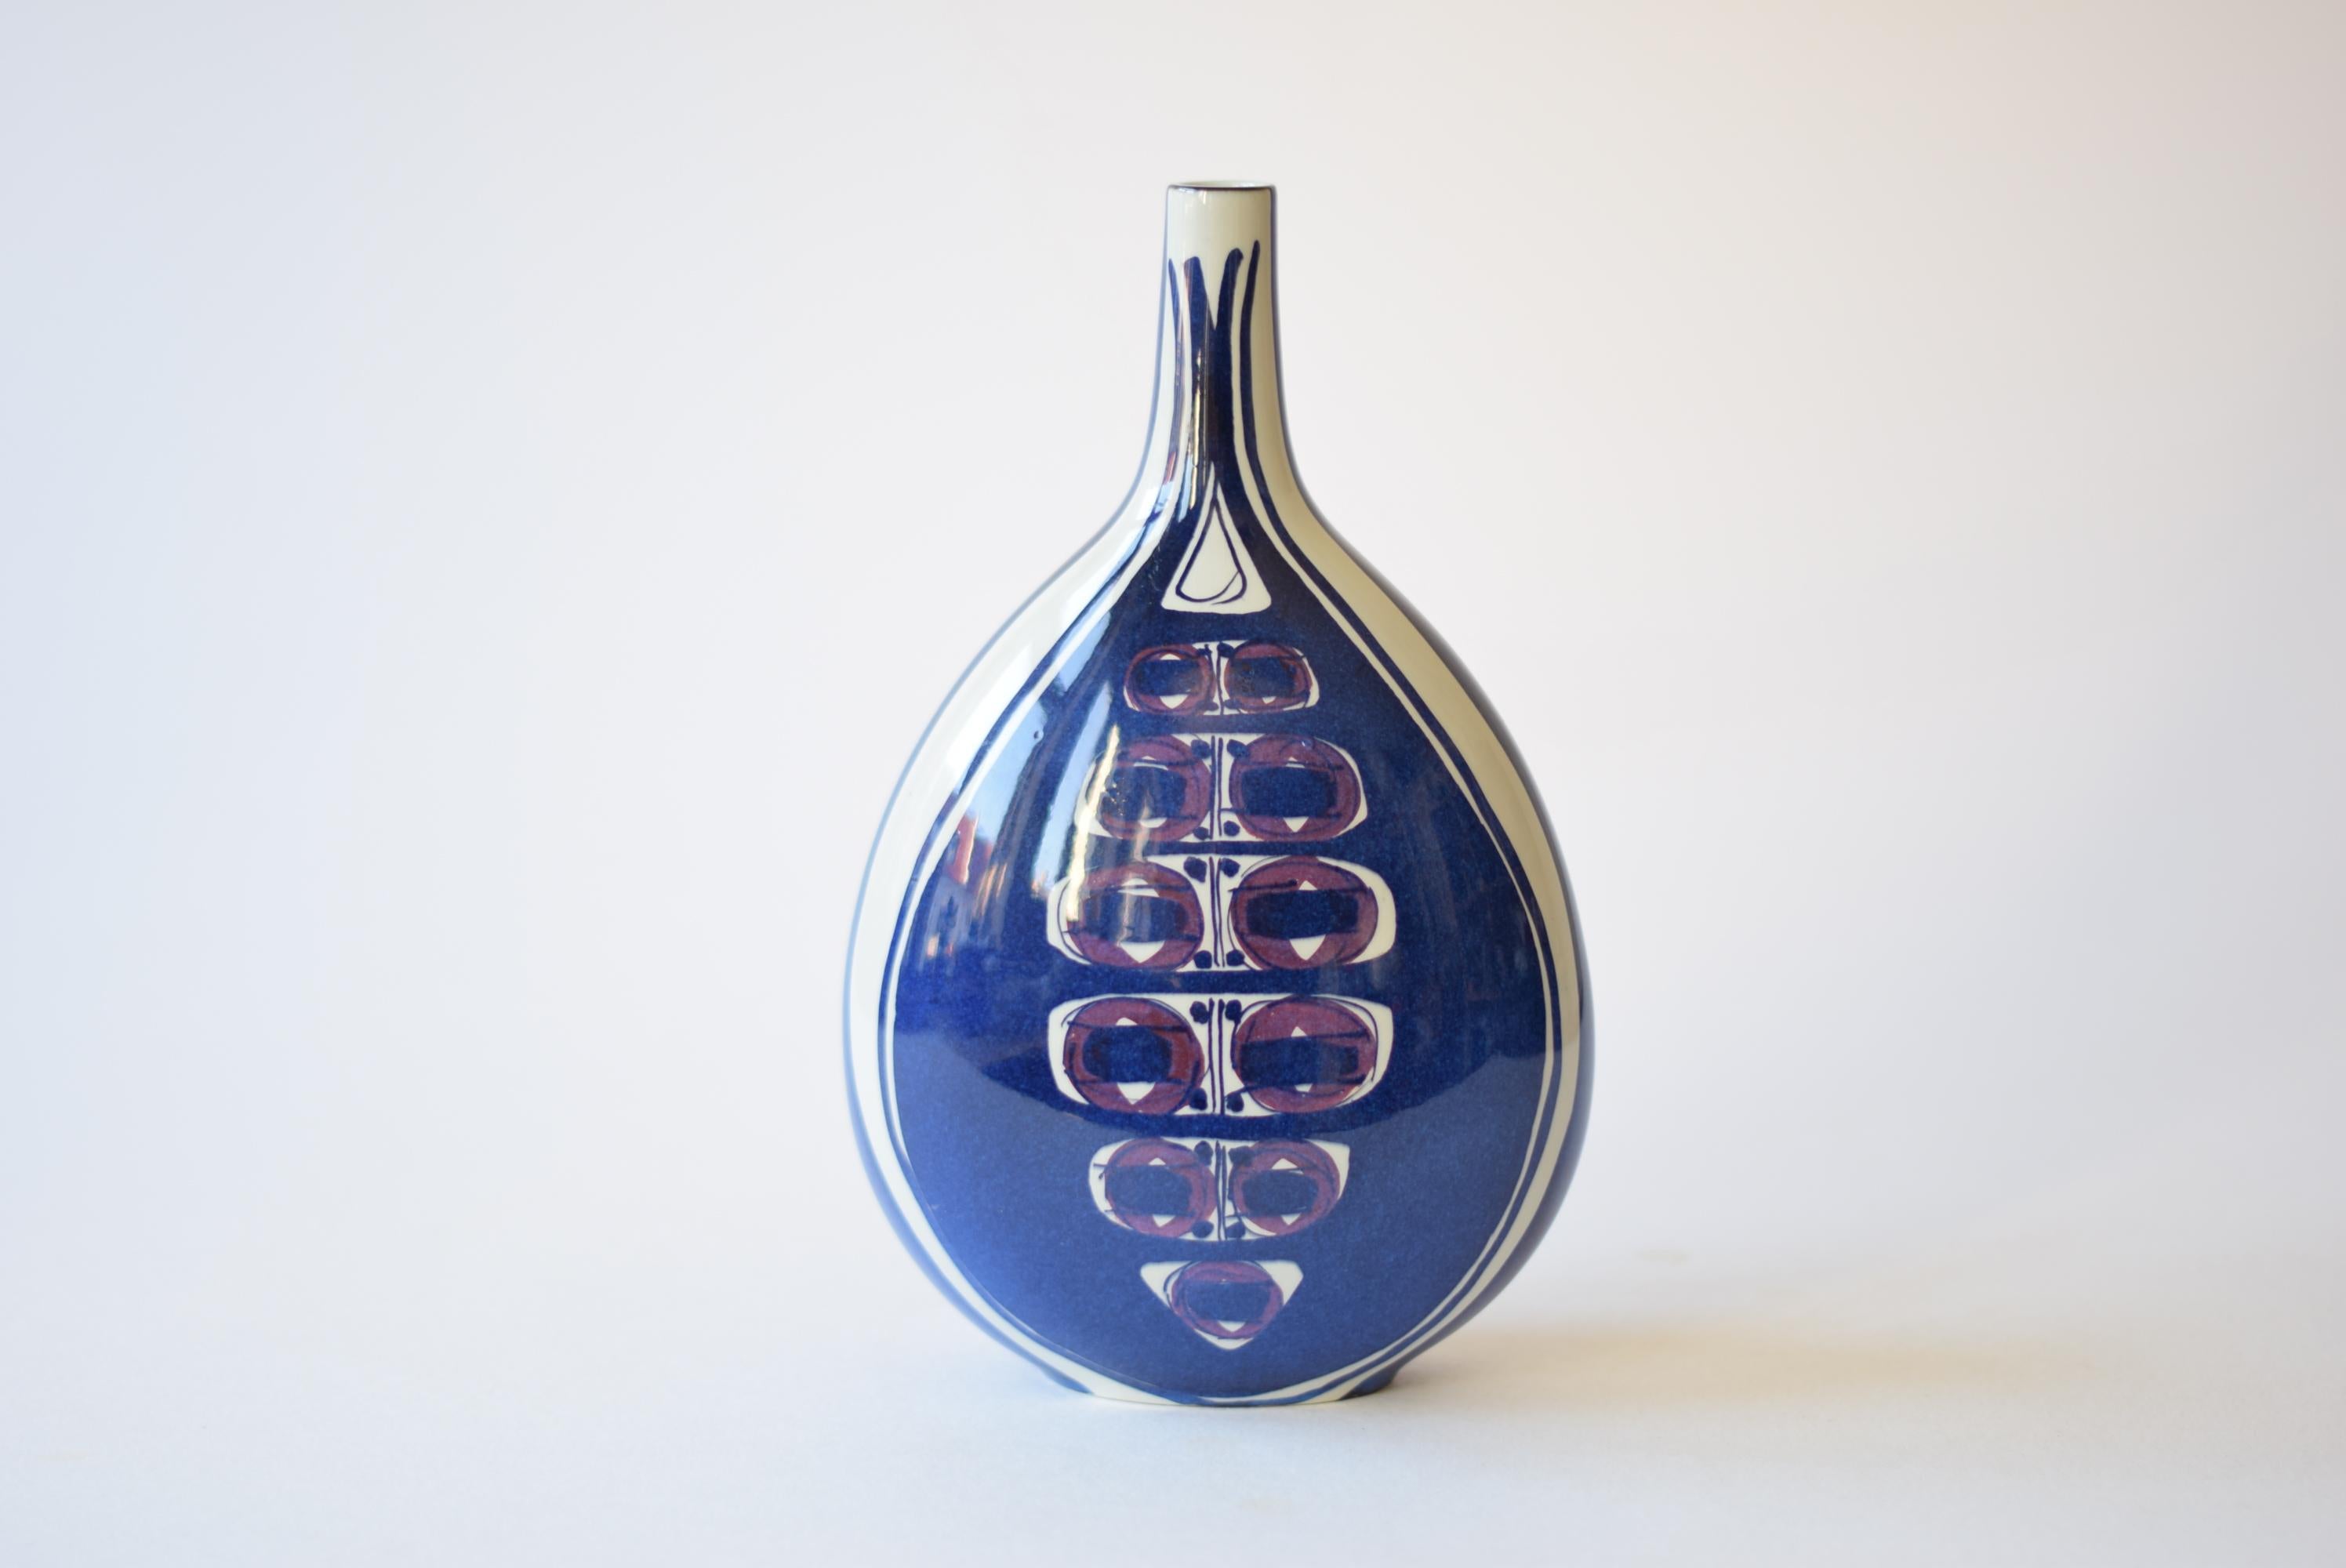 This tall bottle shaped vase from the Aluminia (later brandname Royal Copenhagen) Tenera series was designed by Inge-Lise Koefoed in the 1960s. It has a bold hand painted decor which is different on front and back. This vase is from the earliest